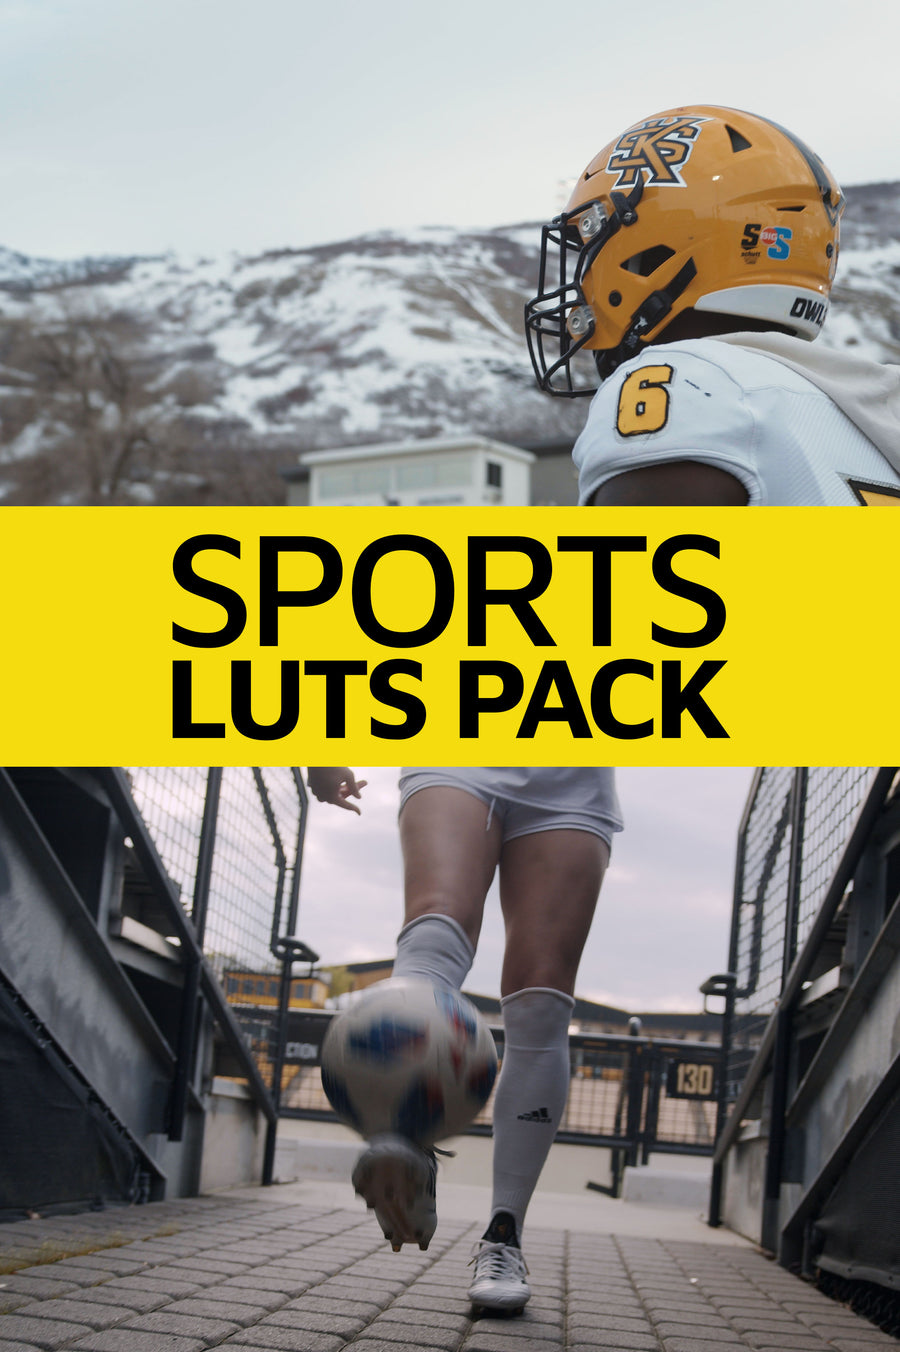 SPORTS LUT PACK